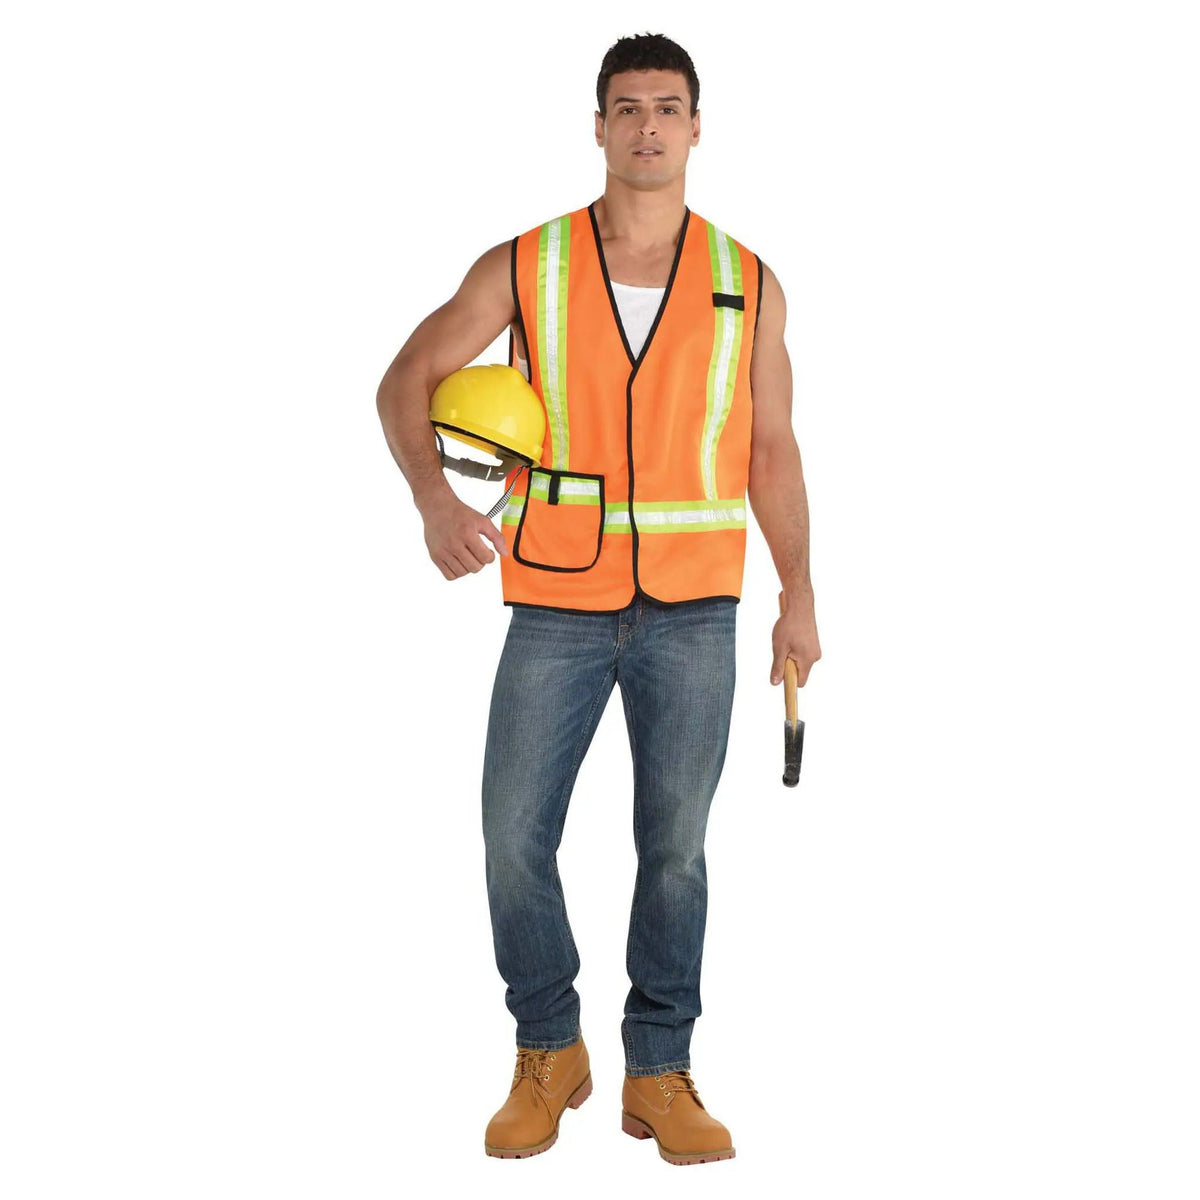 SUIT YOURSELF COSTUME CO. Costume Accessories Construction Worker Vest for Adults 013051827861